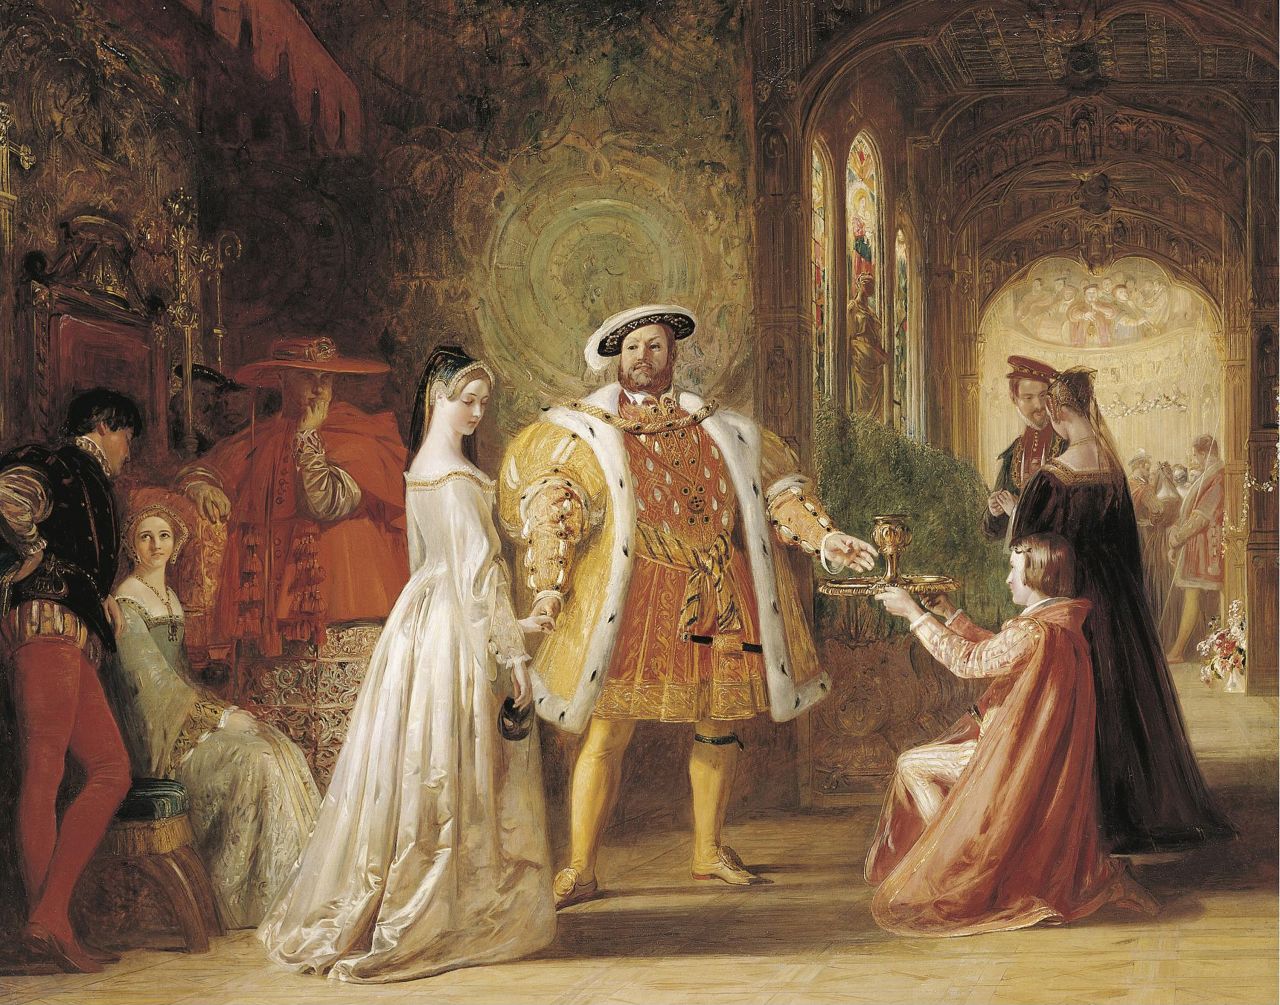 A 19th-century painting depicting the Henry VIII of England and Anne Boleyn's first meeting. 